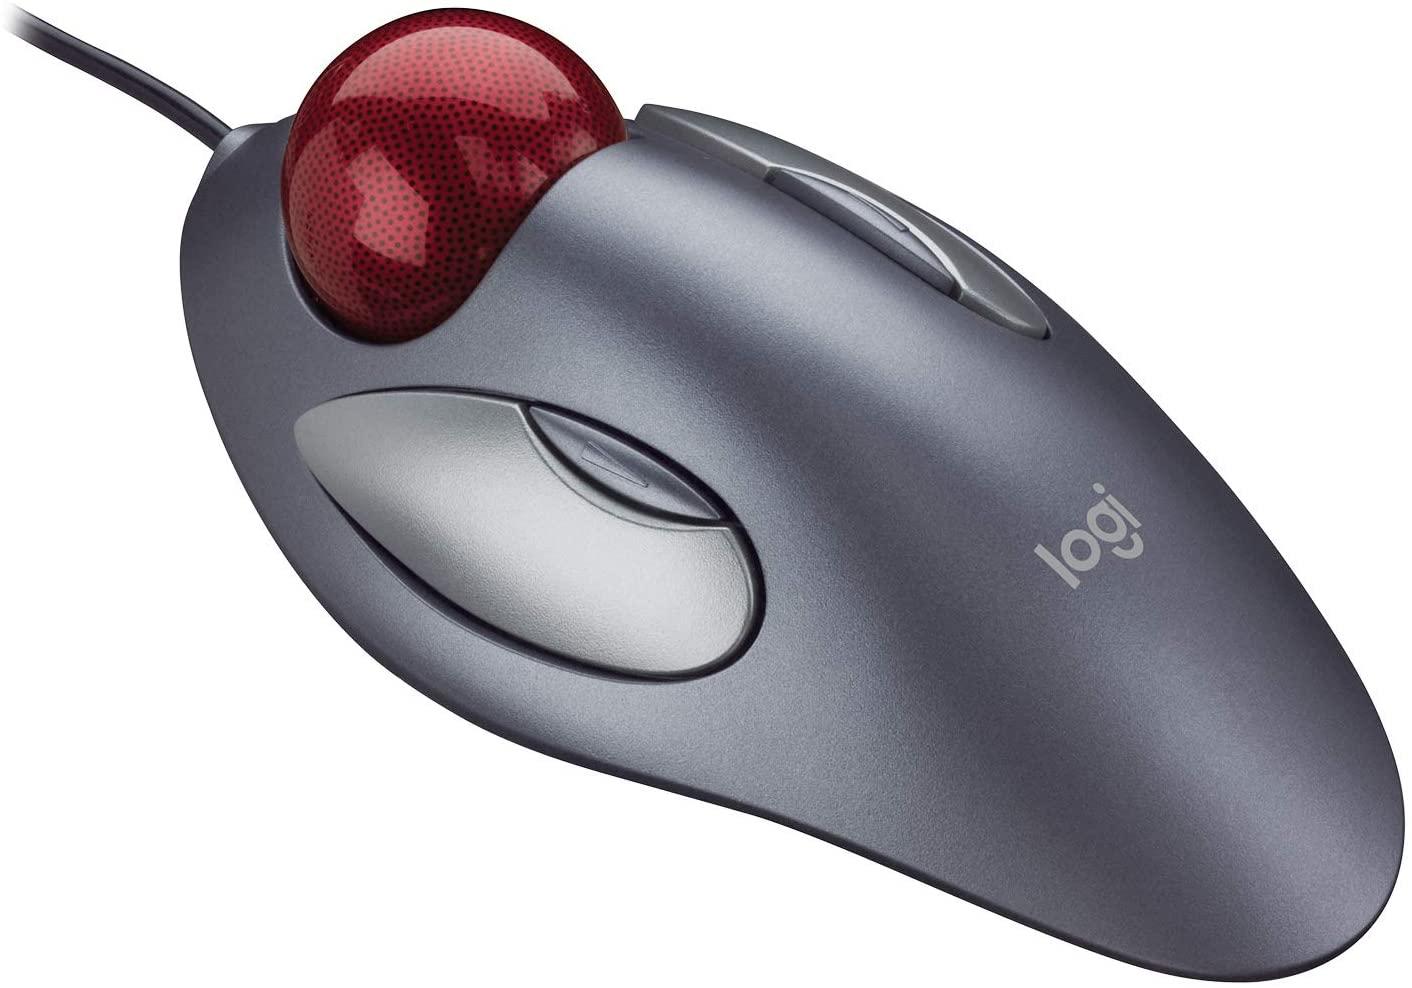 Logitech Trackman Marble Wired Trackball Ergonomic Mouse for $16.99